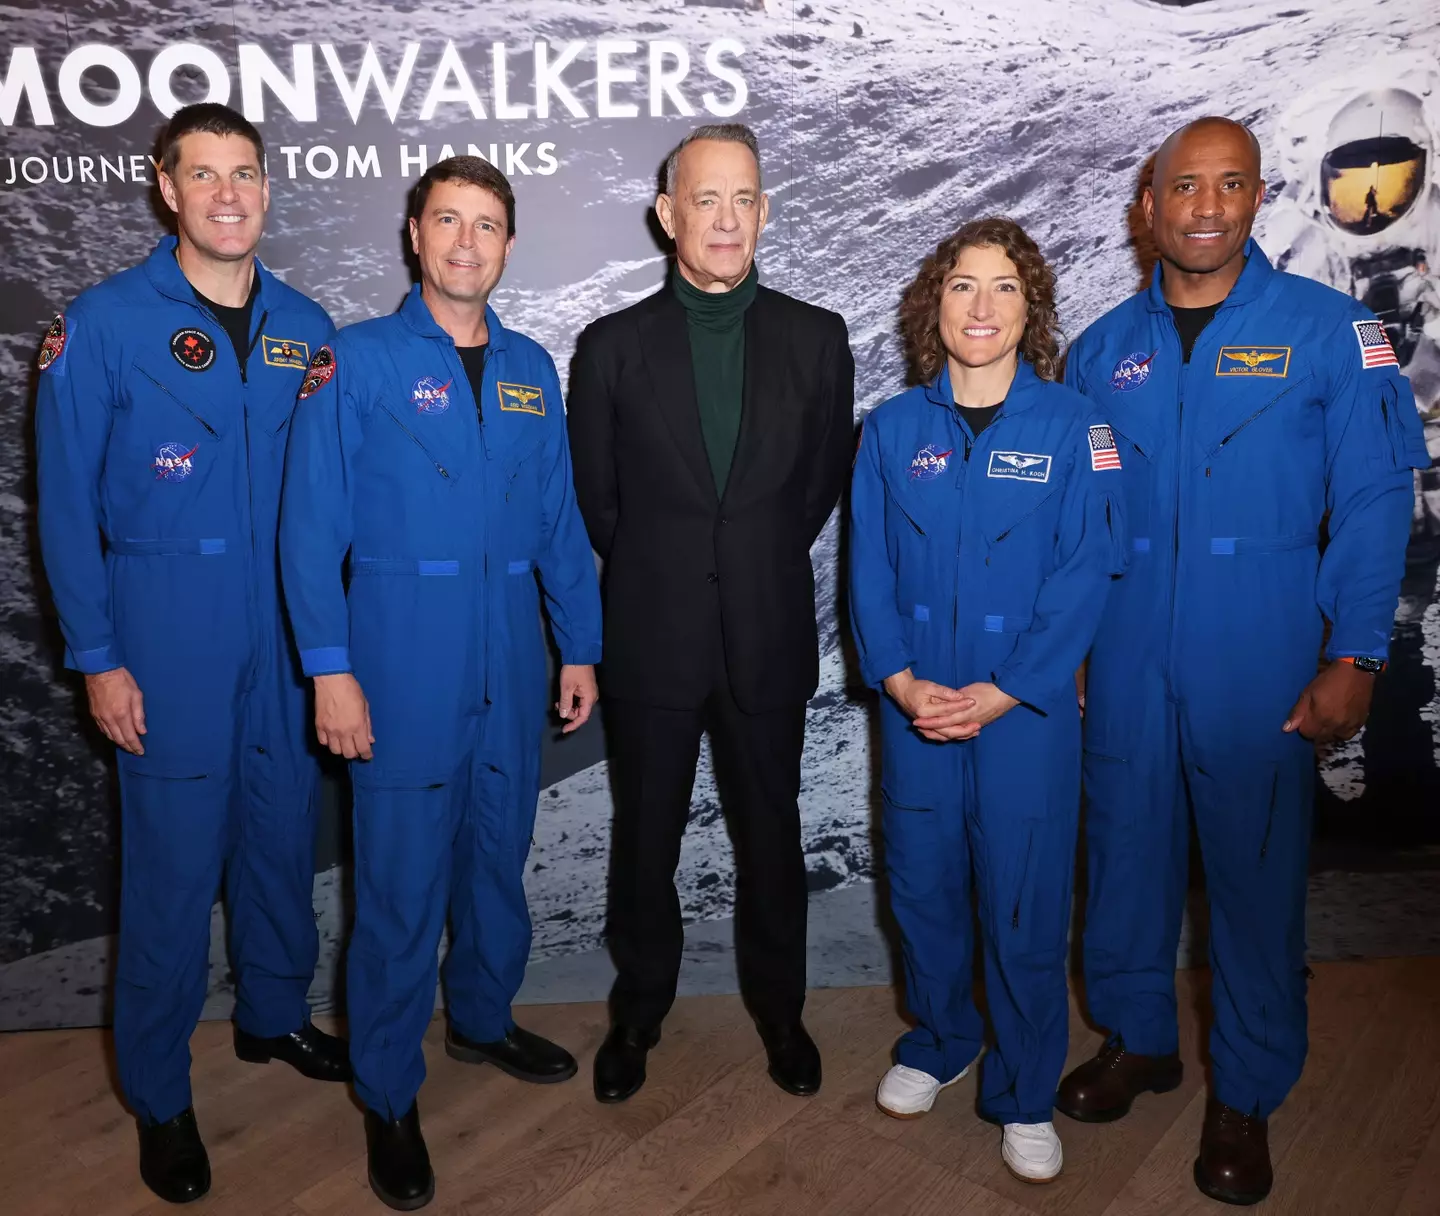 Tom Hanks joined the astronauts in London.